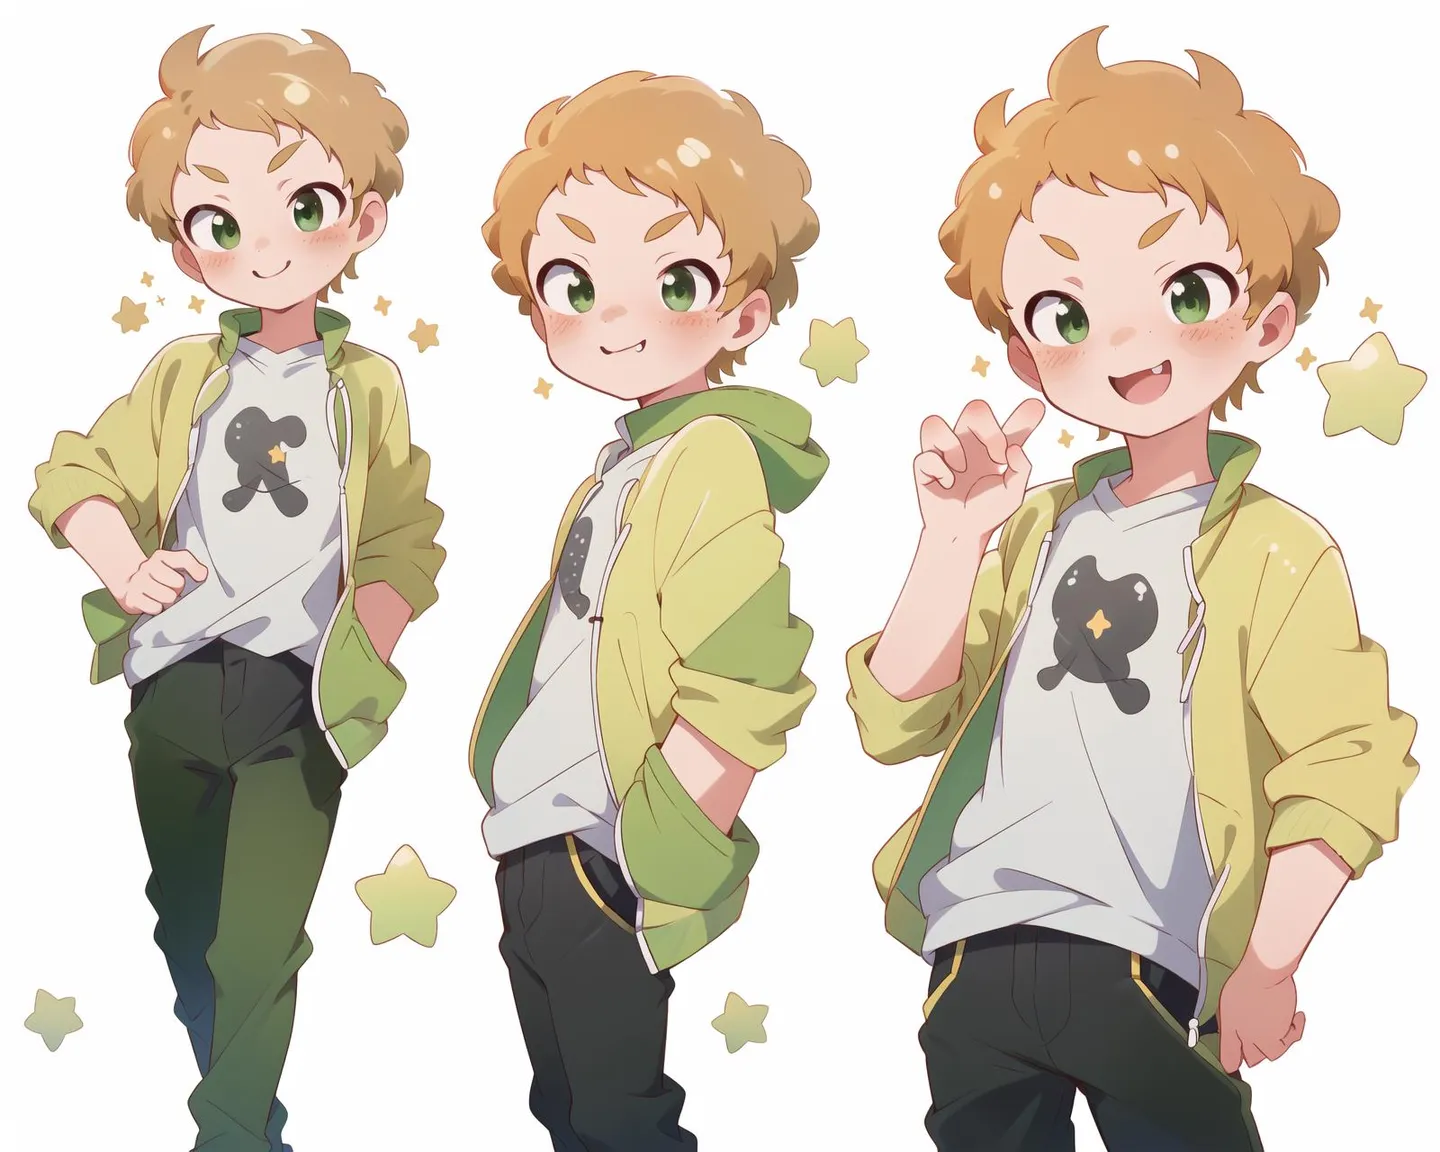 Anime boy in green jacket, multiple poses, created using Stable Diffusion.